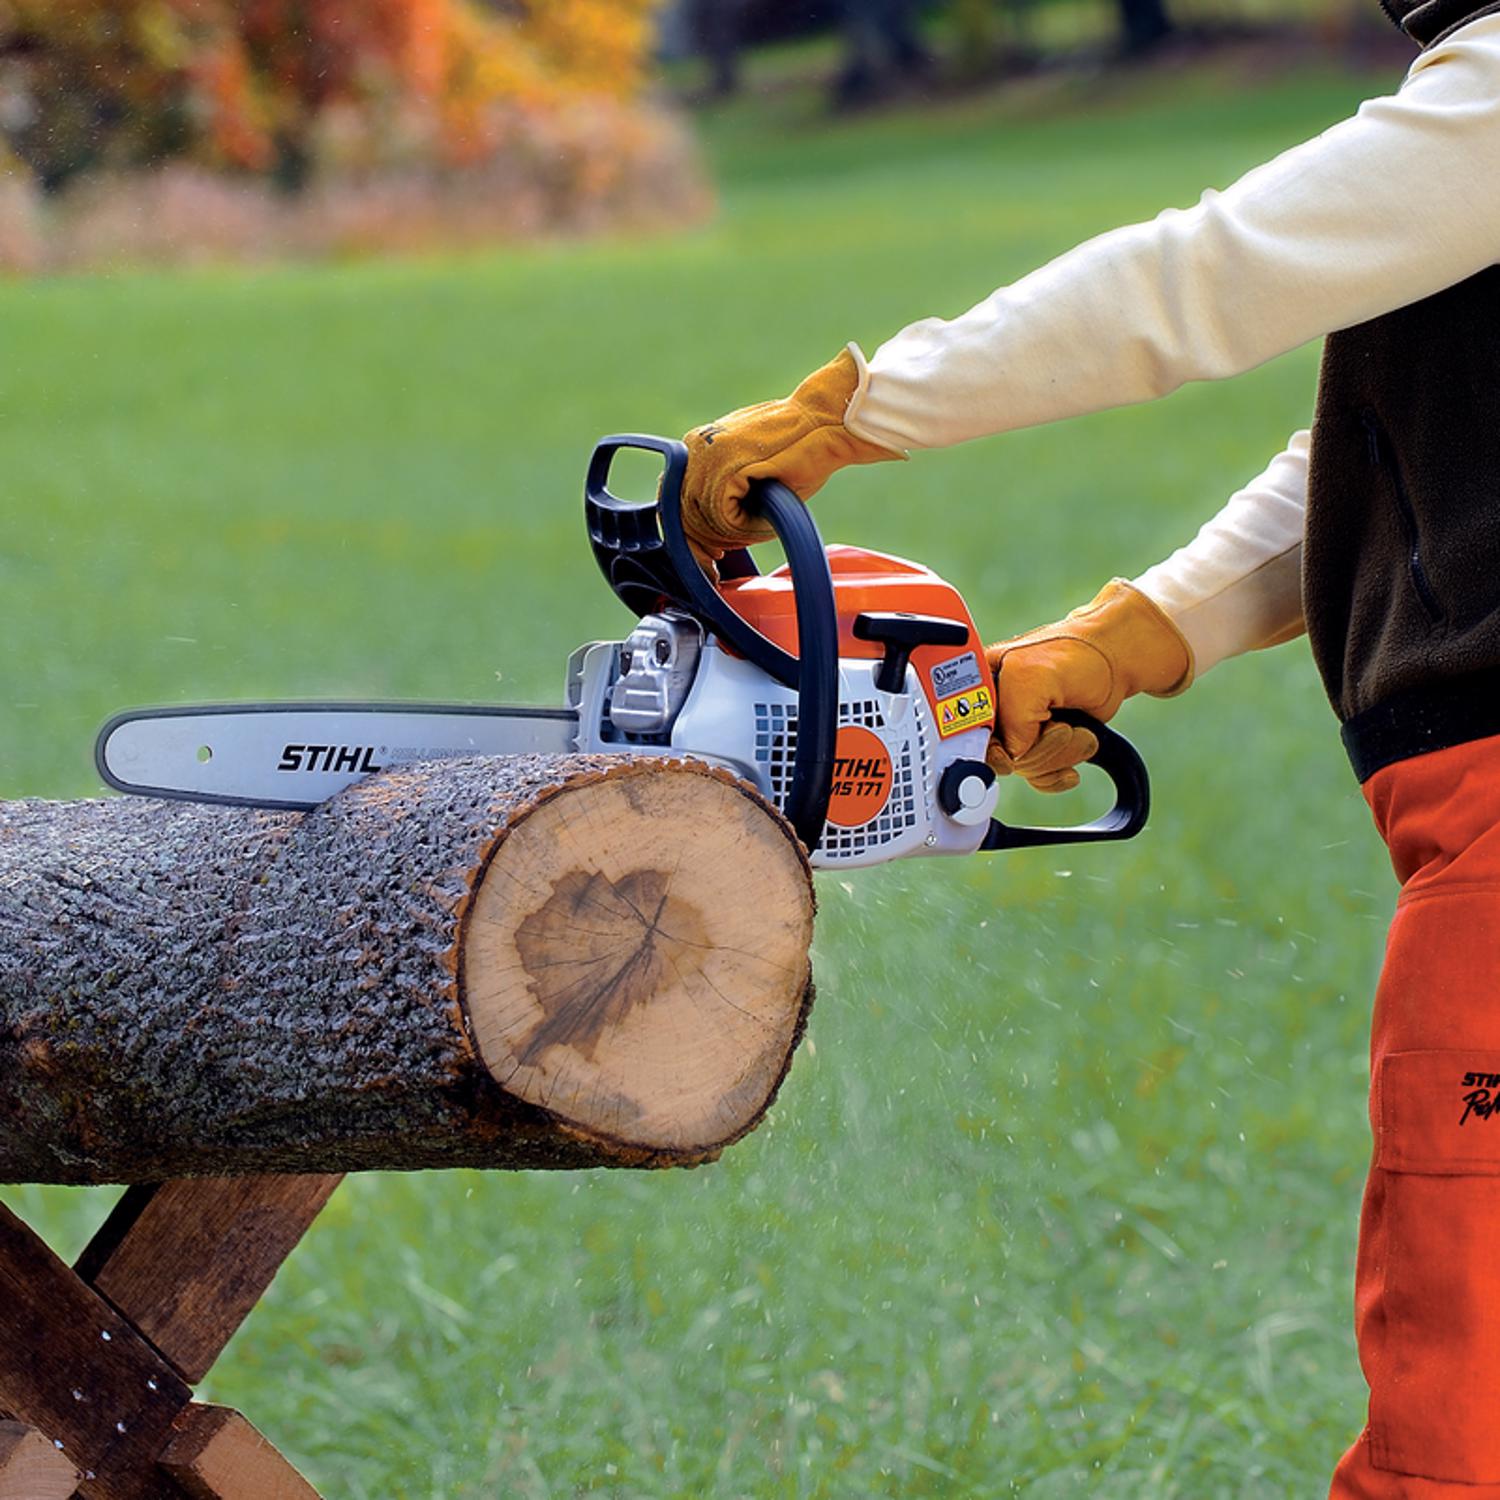 STIHL MS 171 16 in. 31.8 cc Gas Powered Chainsaw